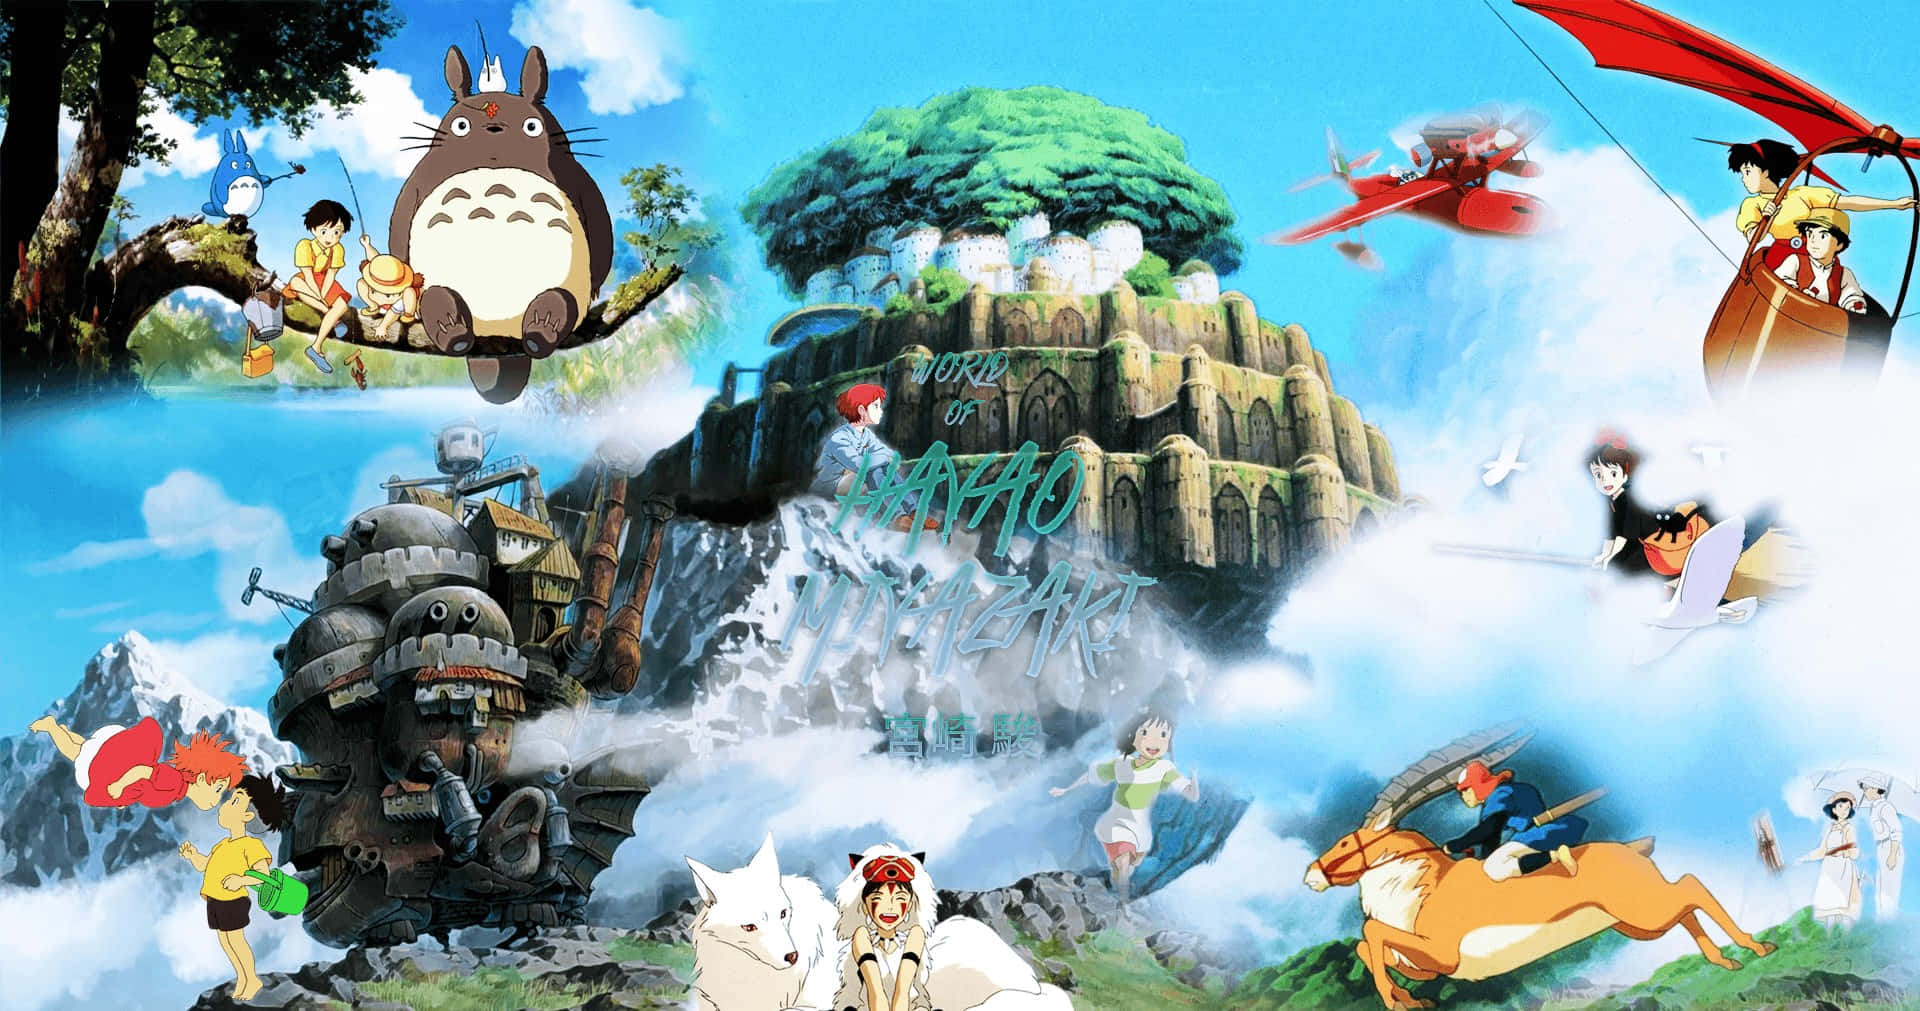 Iconic Hayao Miyazaki Movie Characters in a Magical Forest Wallpaper